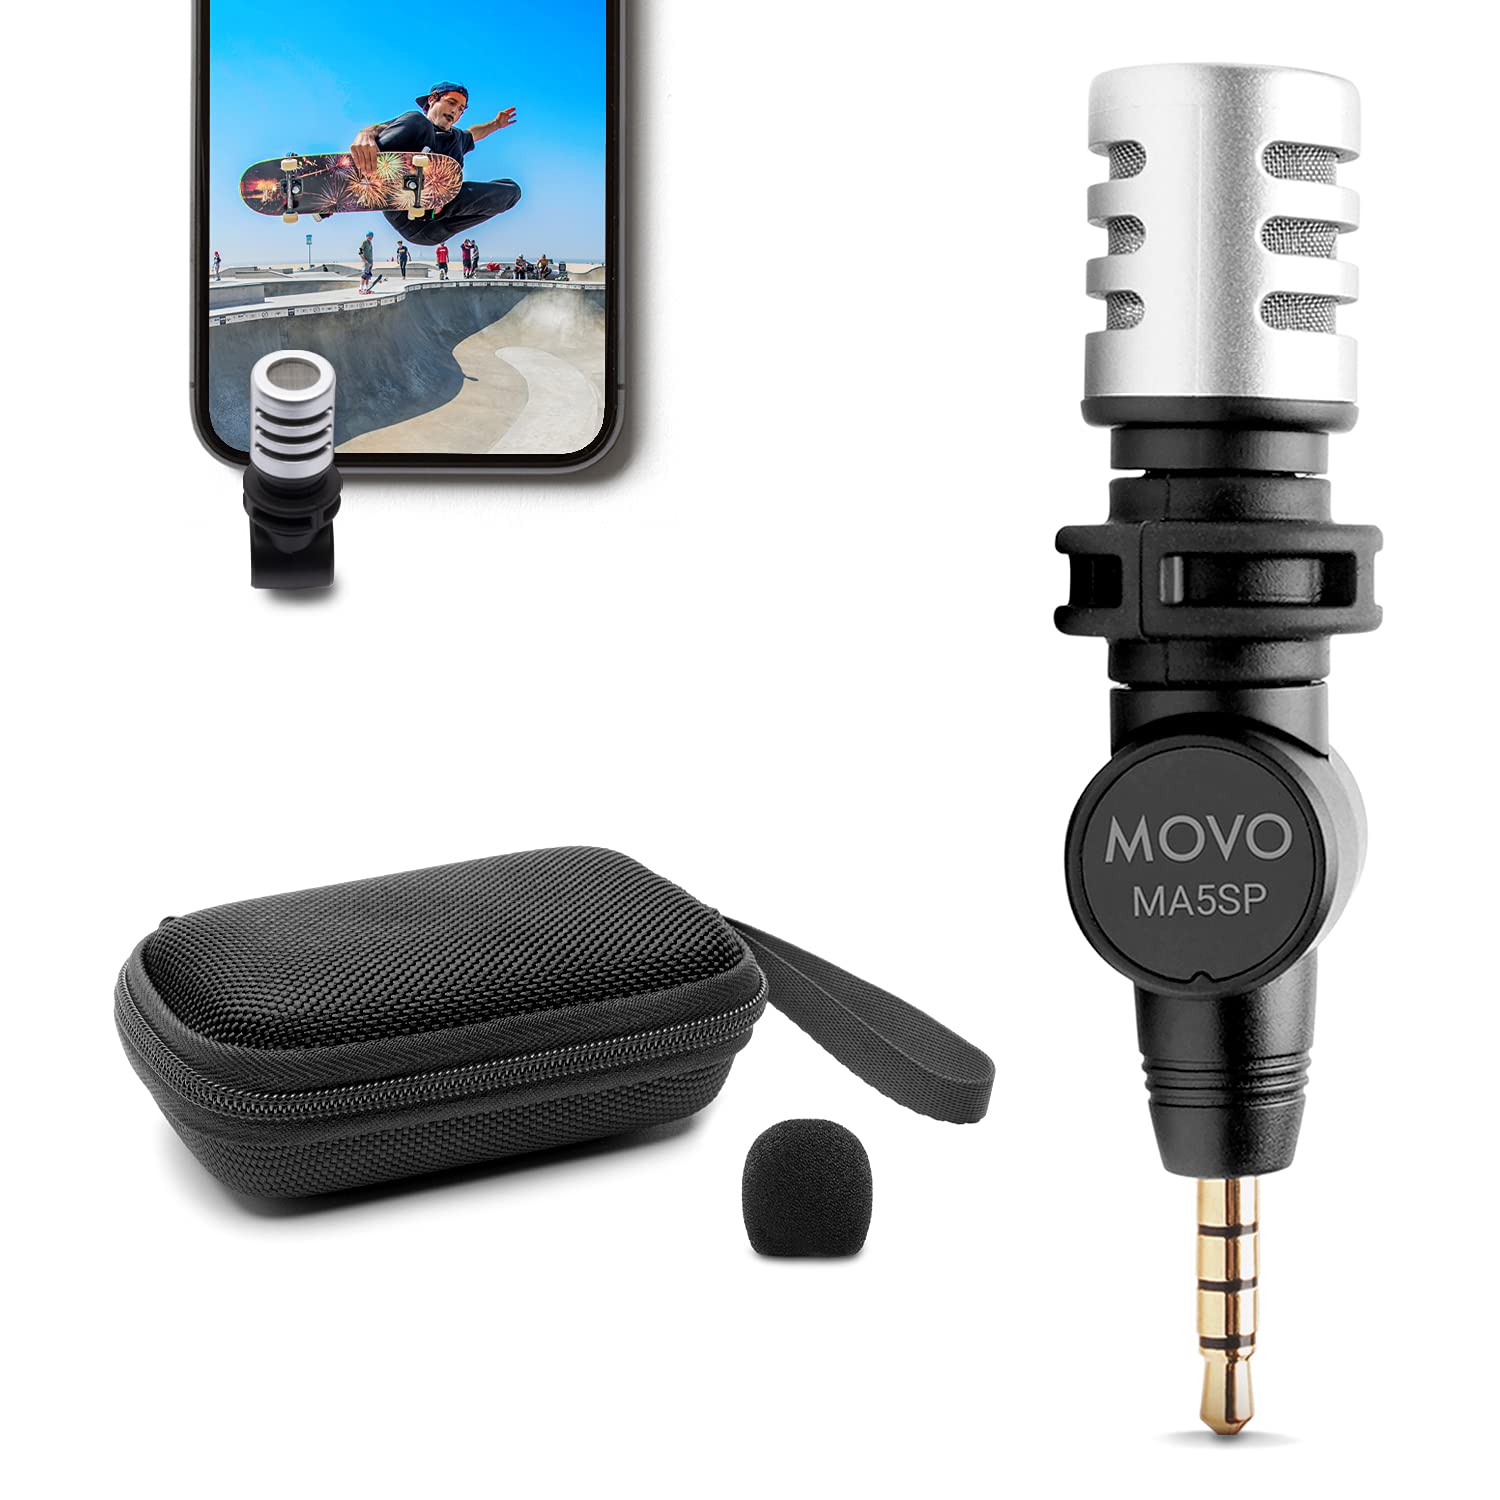 Movo MA5SP 3.5mm TRRS Shotgun Microphone for iPhone or Android Devices - Omnidirectional Phone Microphone with 180� Rotation - Mini Travel Smartphone Microphone for Video, Vlogging, Interview, Travel  - Very Good